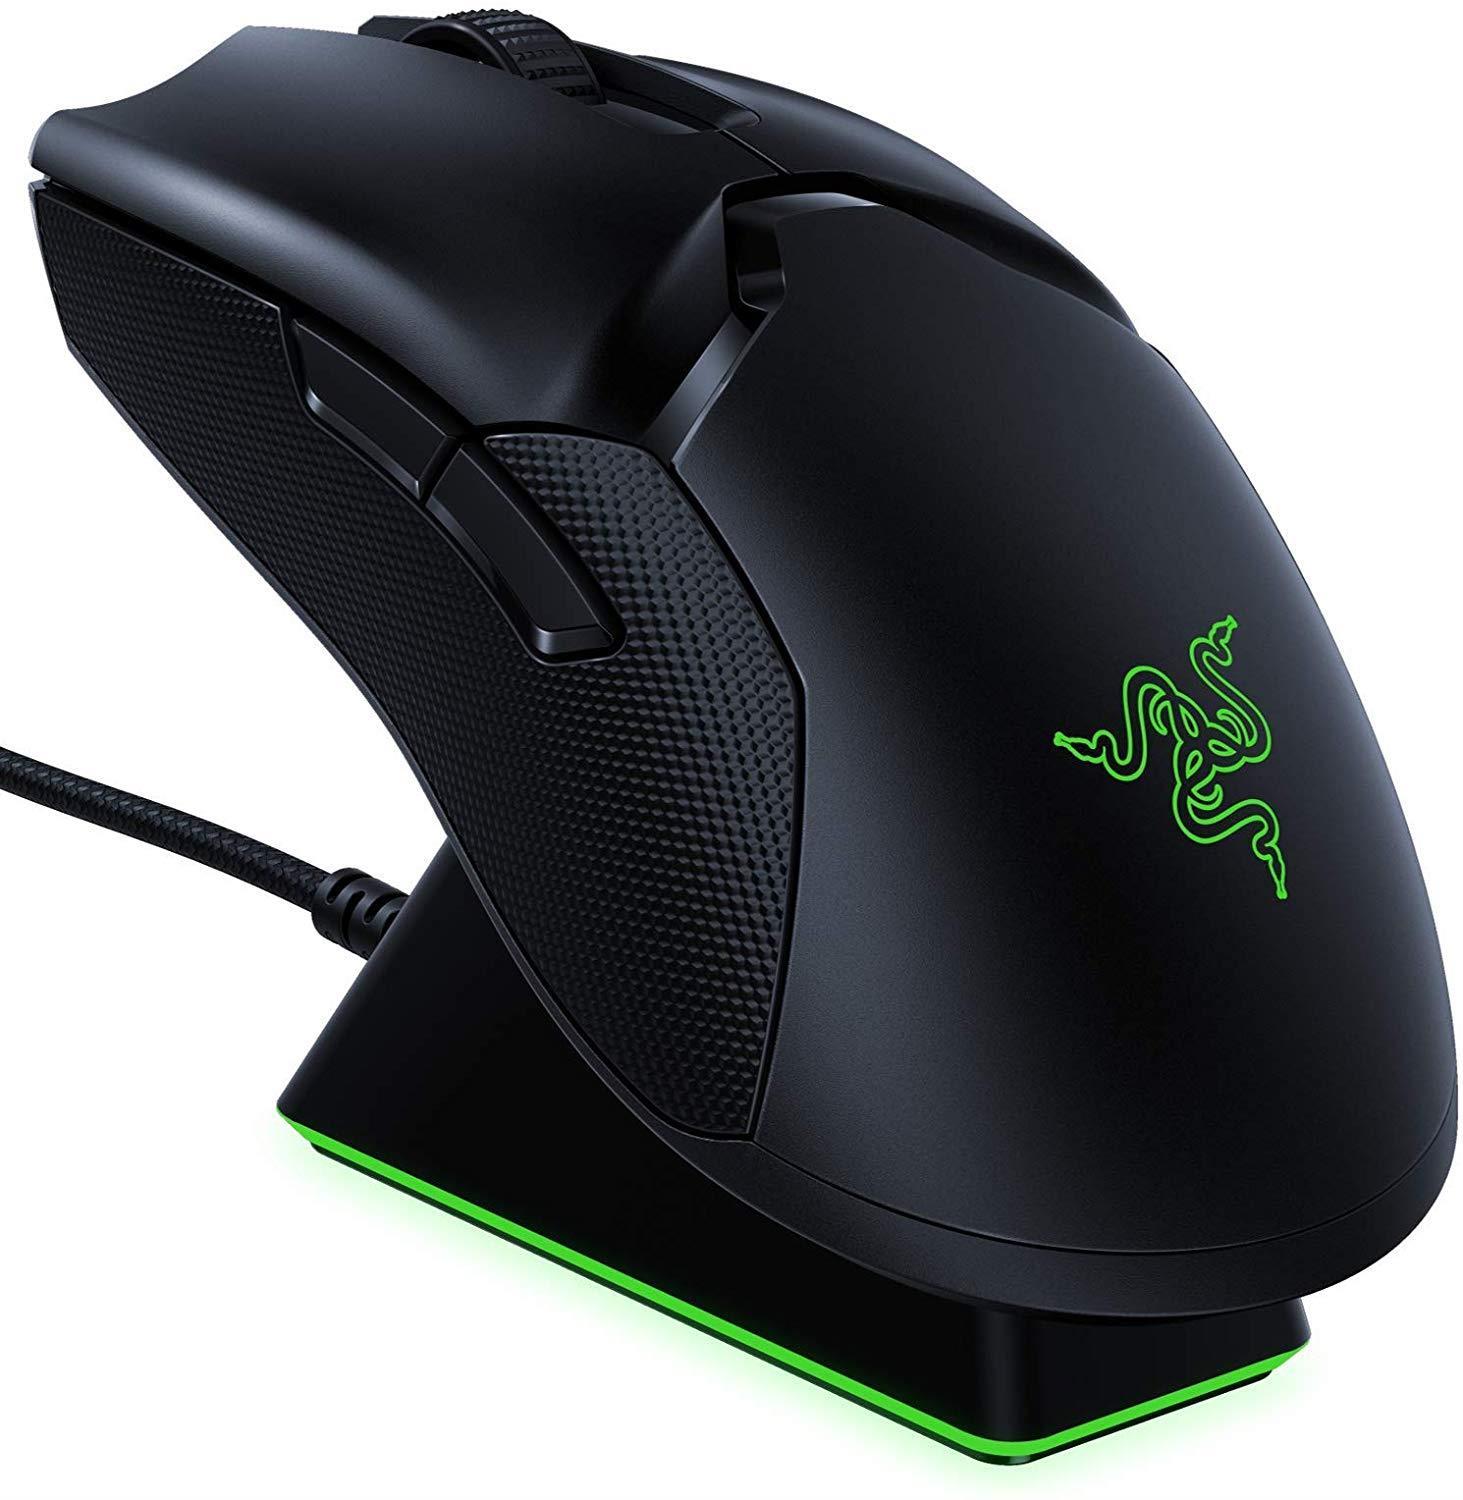 Razer Viper Ultimate - Best Gaming Wireless Mouse